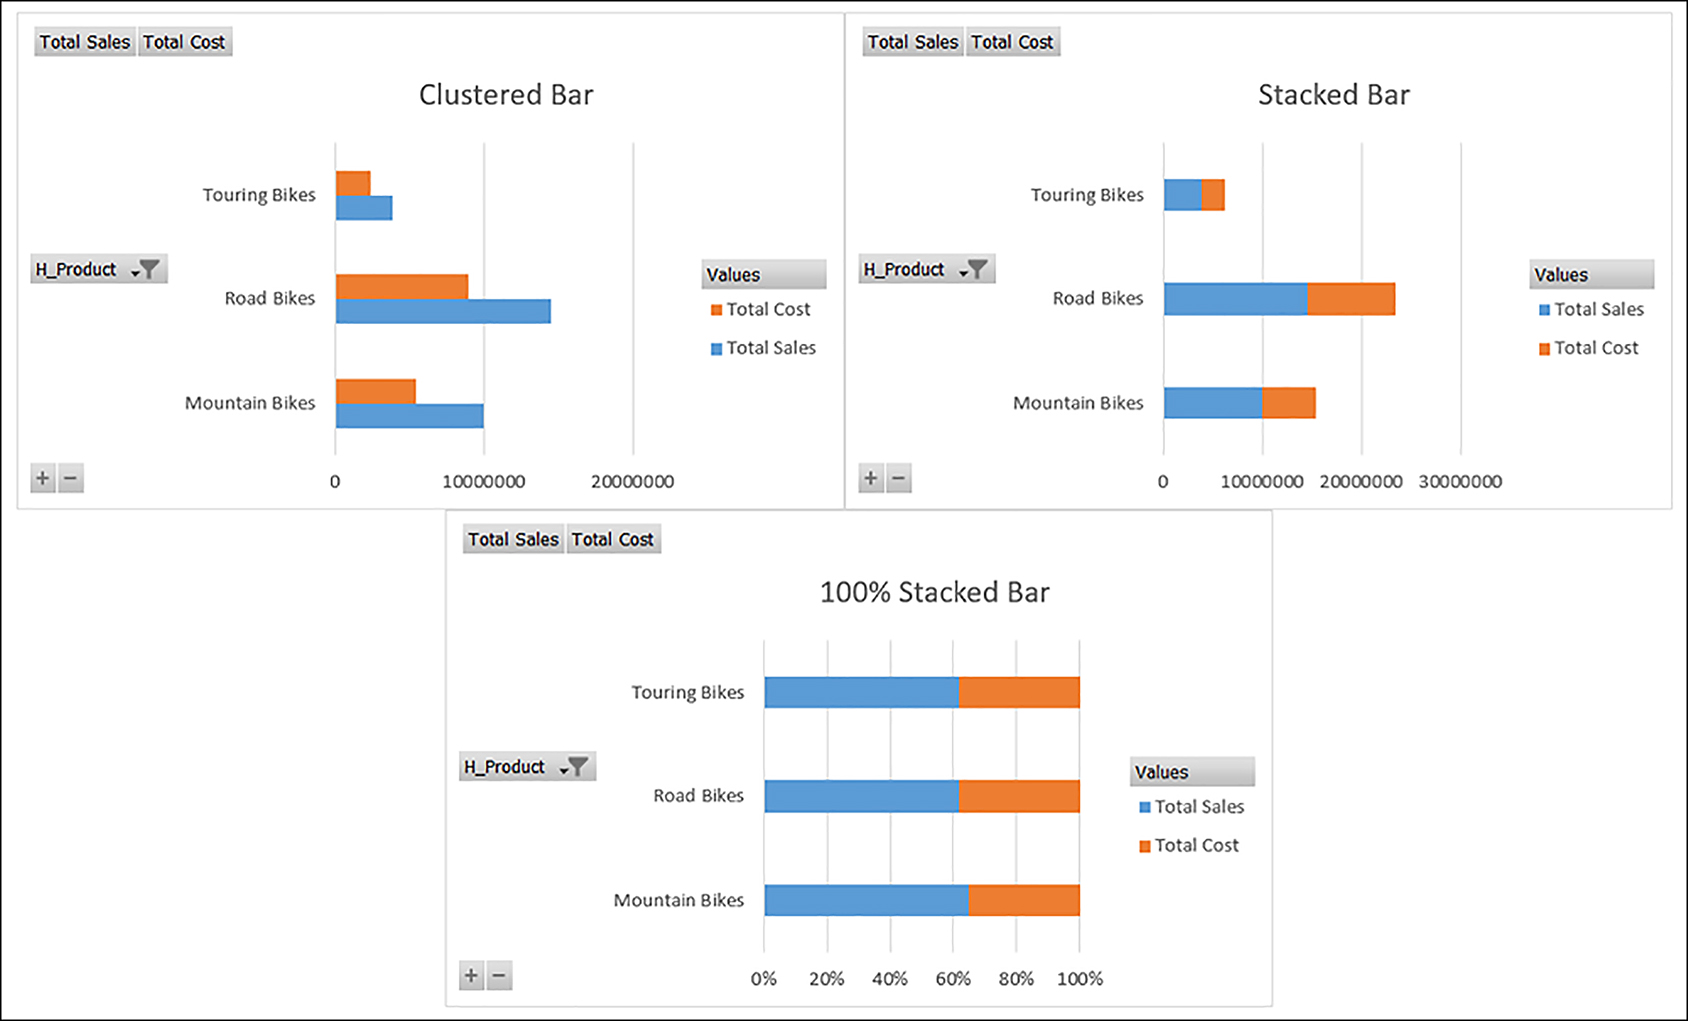 This figure shows an example of the Clustered Bar, Stacked Bar, and 100% Stacked Bar charts that are available in Excel.